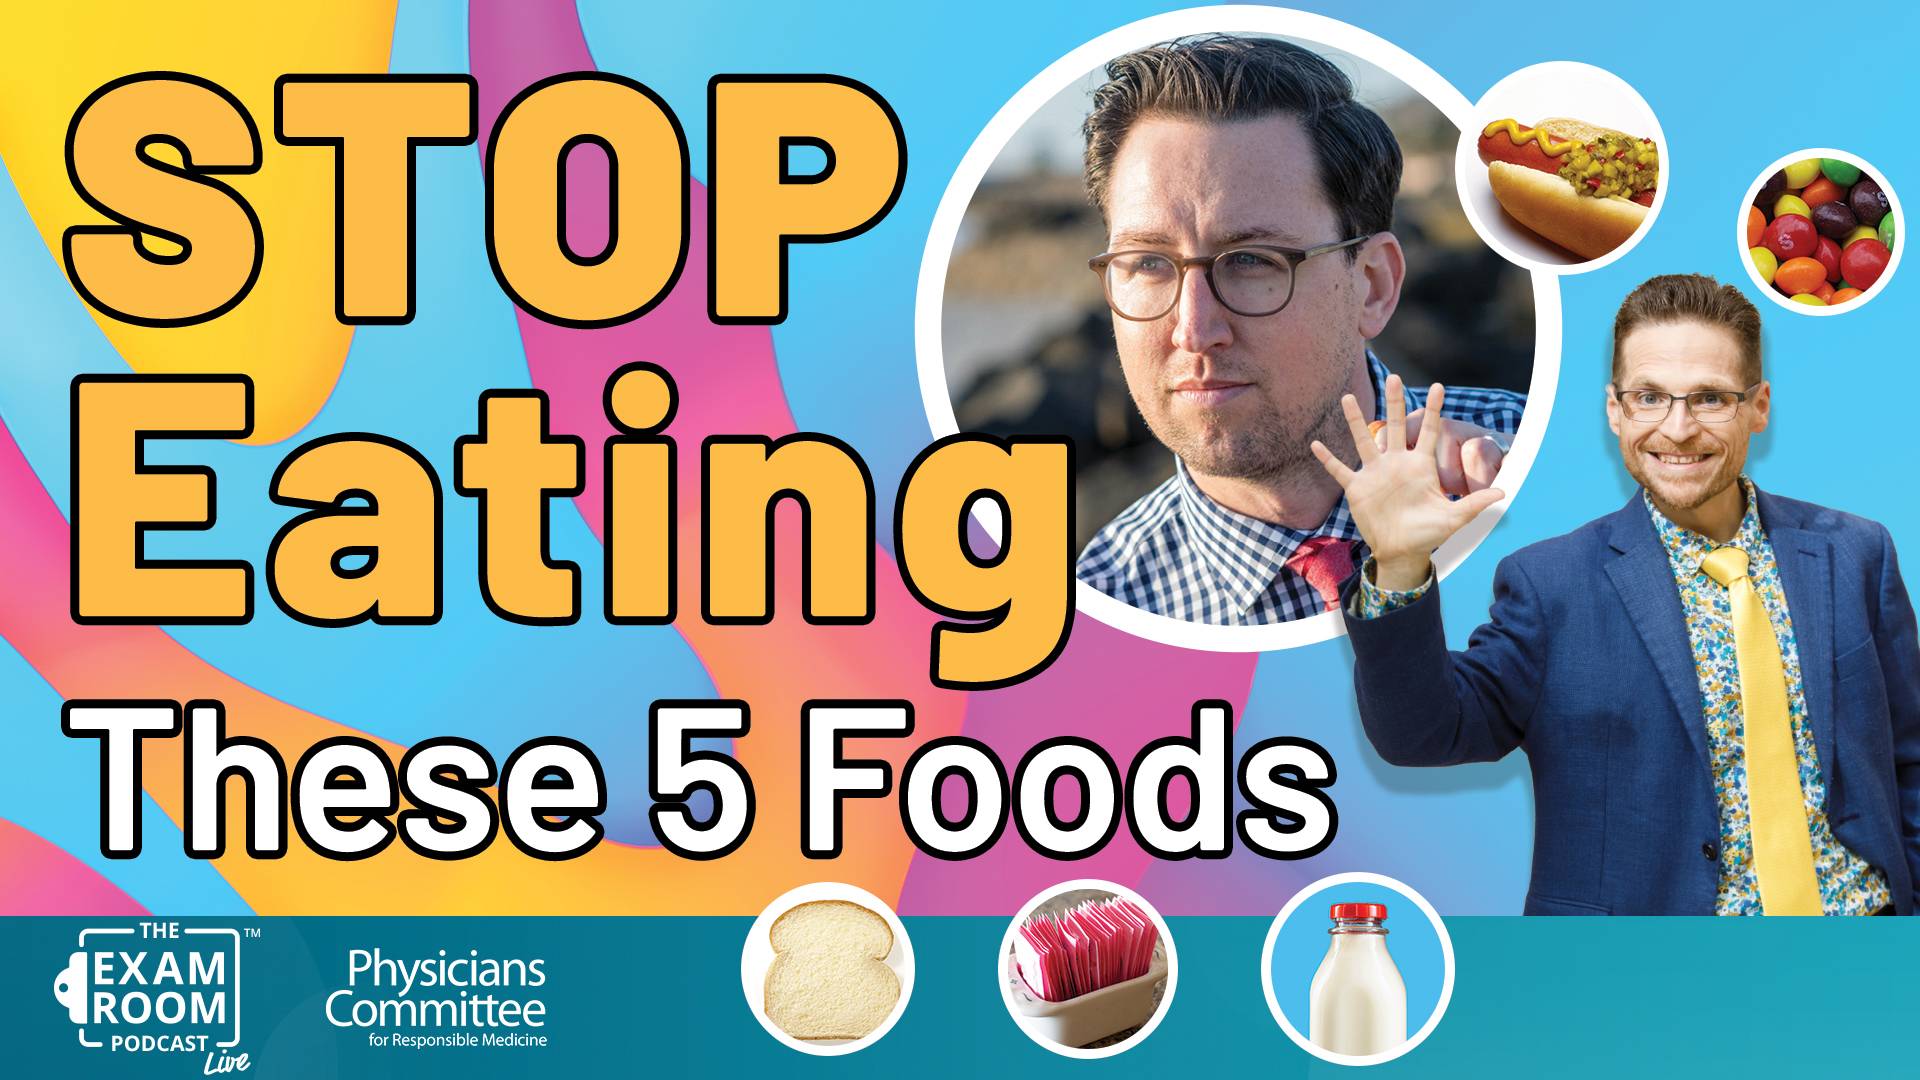 5 Foods You Should Stop Eating | Dr. Will Bulsiewicz Live Q&A